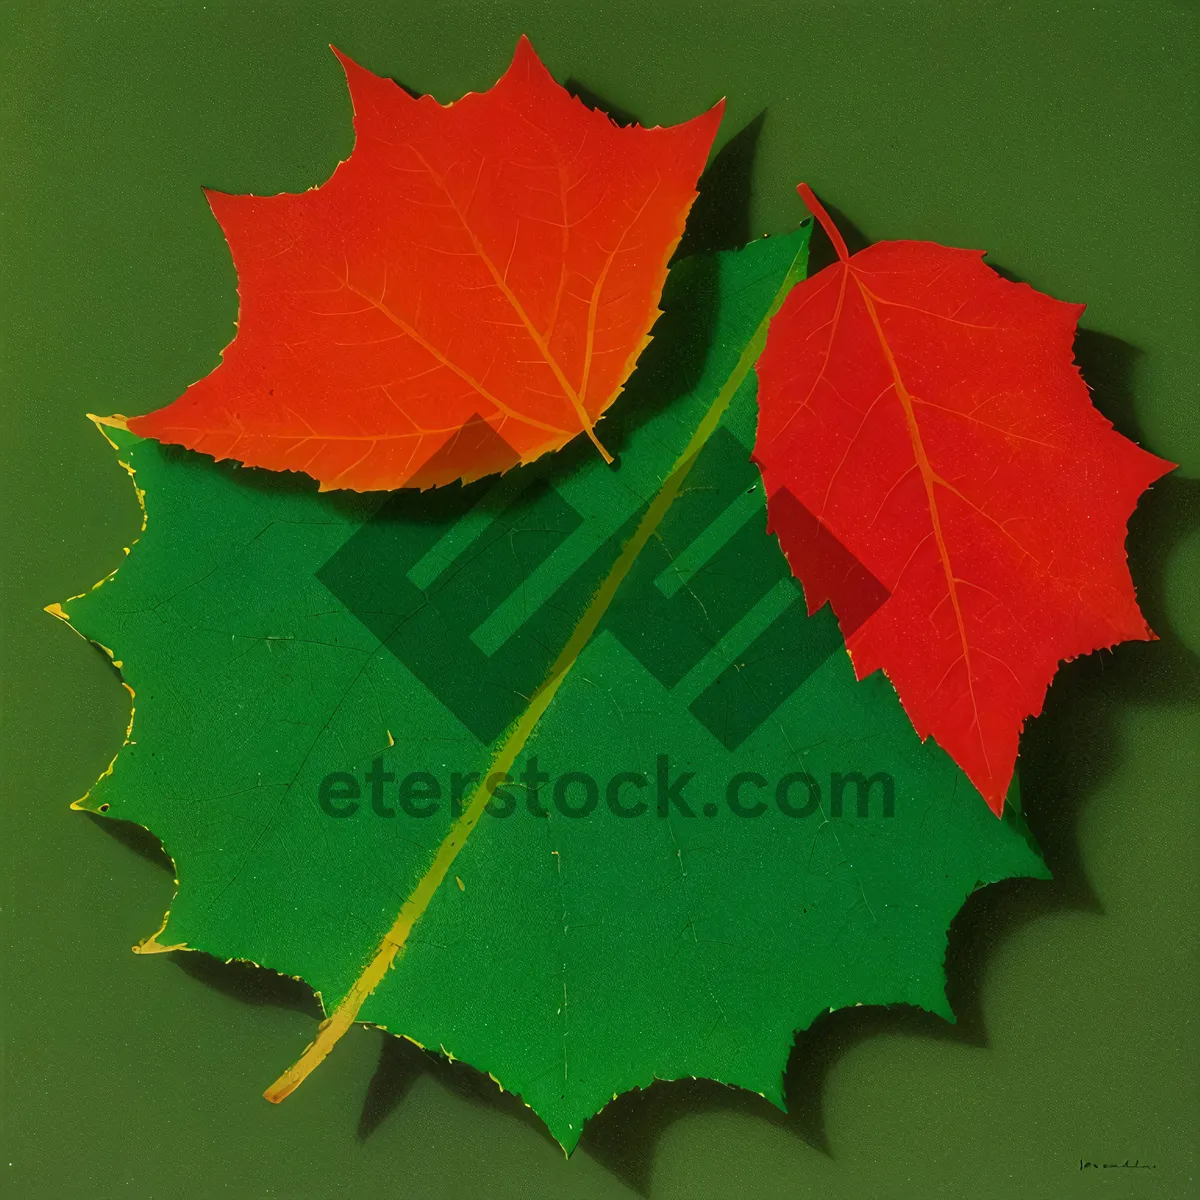 Picture of Vibrant Autumn Foliage: Maple and Oak Leaves in Bright Colors